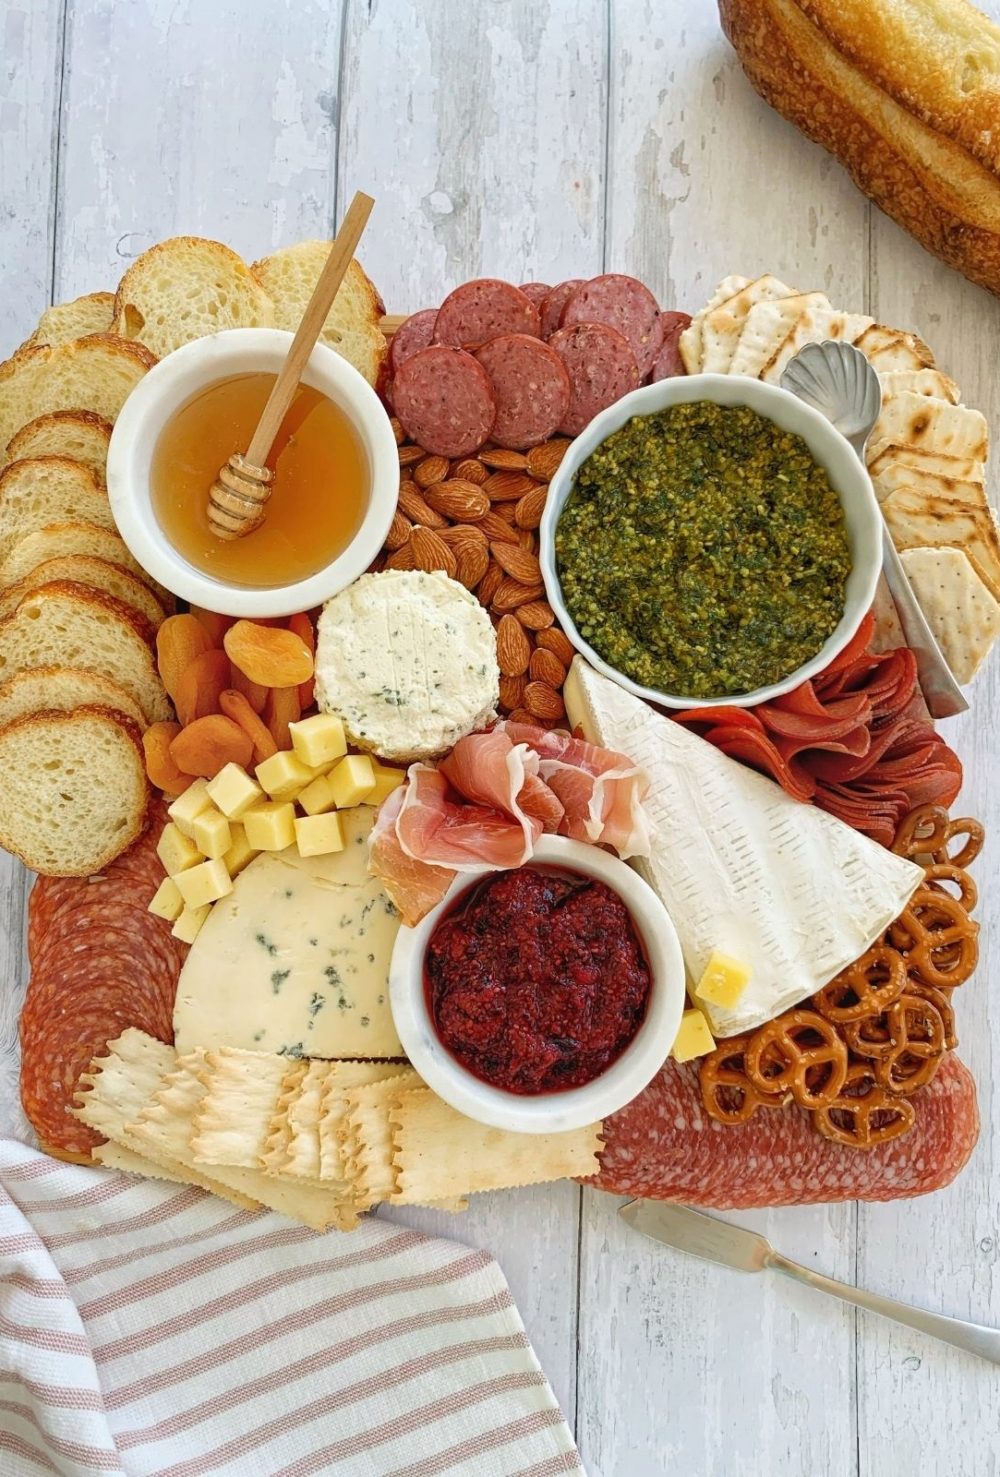 A charcuterie board full of meats, cheeses, sauces, almonds, pretzels, and bread.